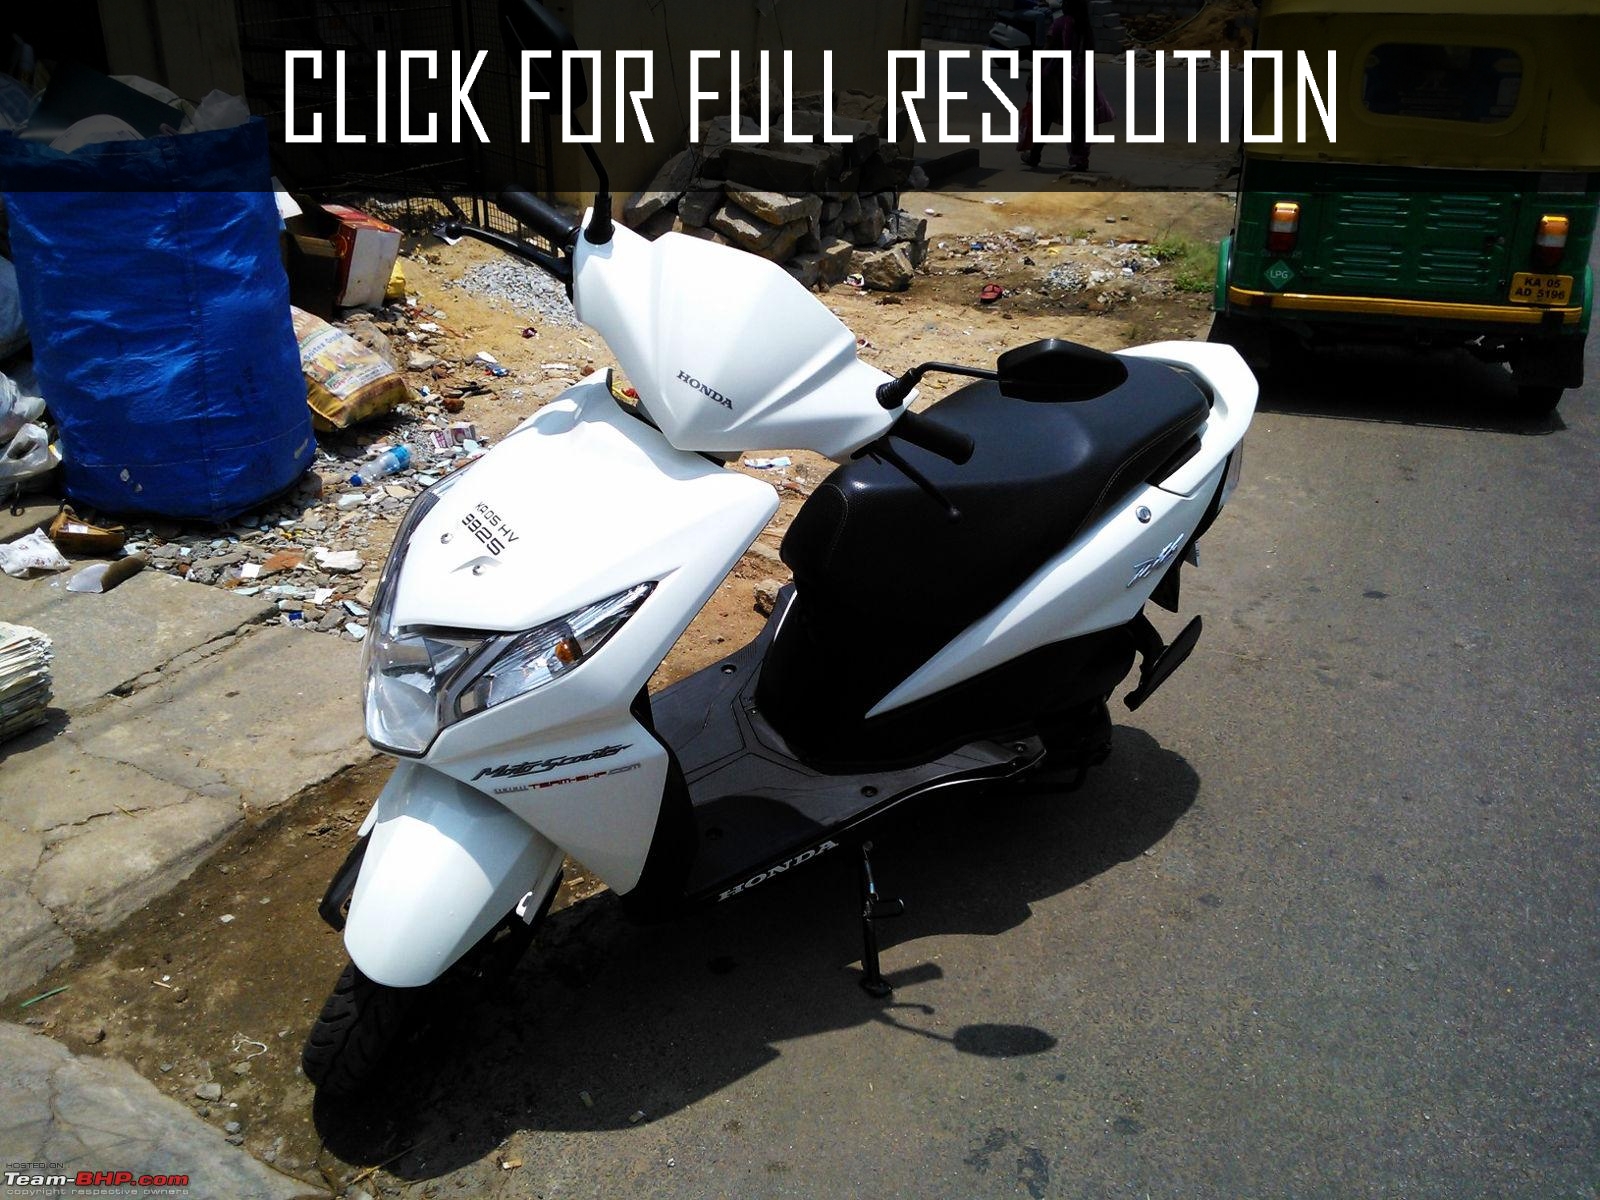 2014 Honda Dio Best Image Gallery 7 11 Share And Download